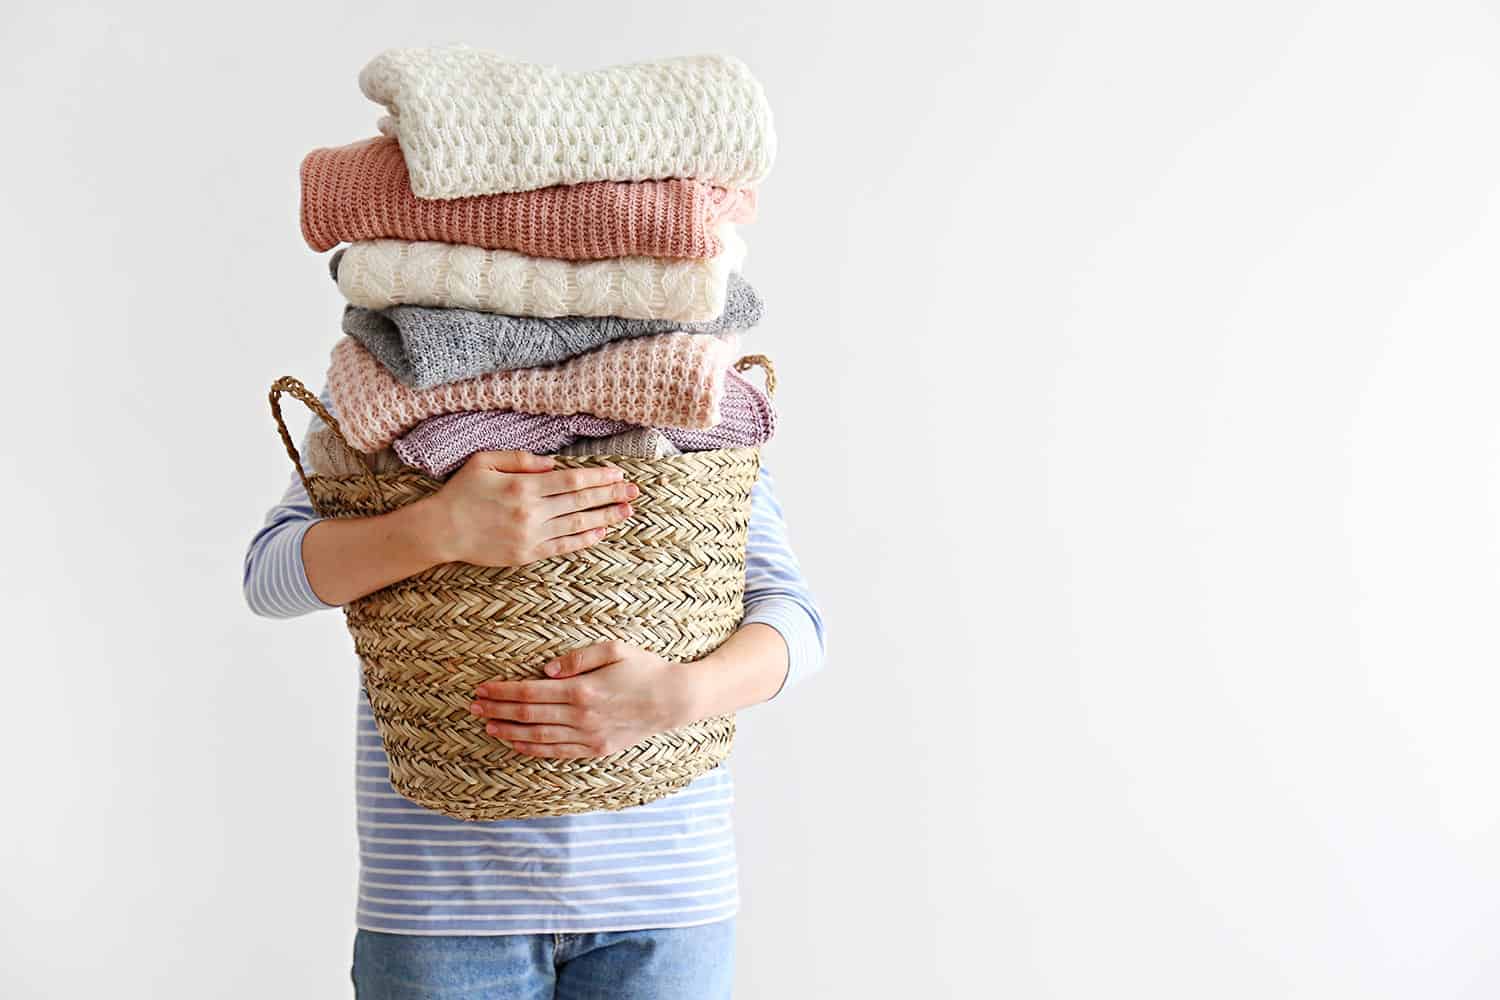 Pile of knitted sweaters of different colors and patterns perfectly stacked on woman's hands